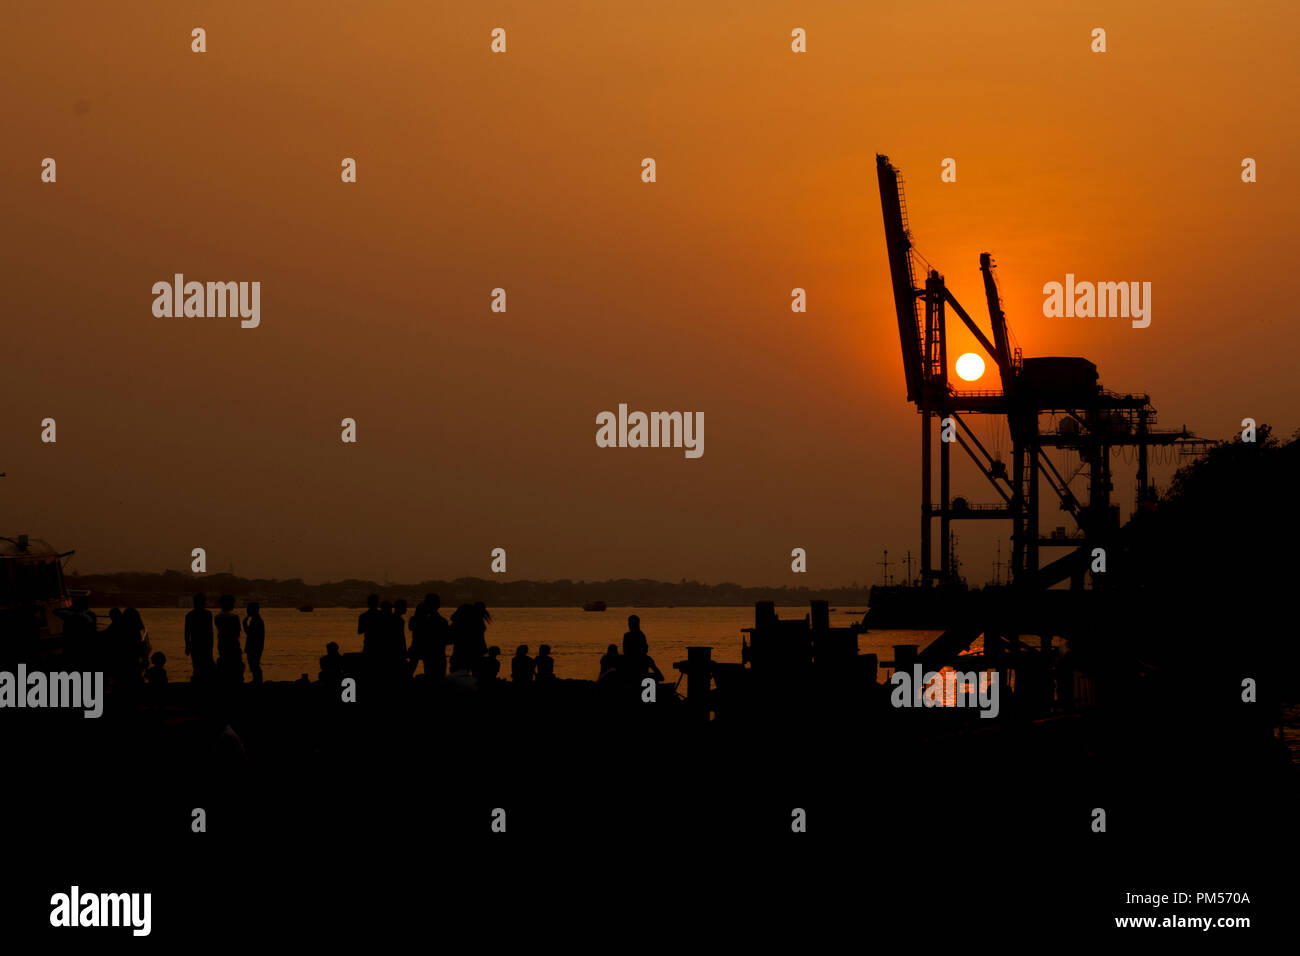 Sunset at Botahtaung harbour Stock Photo